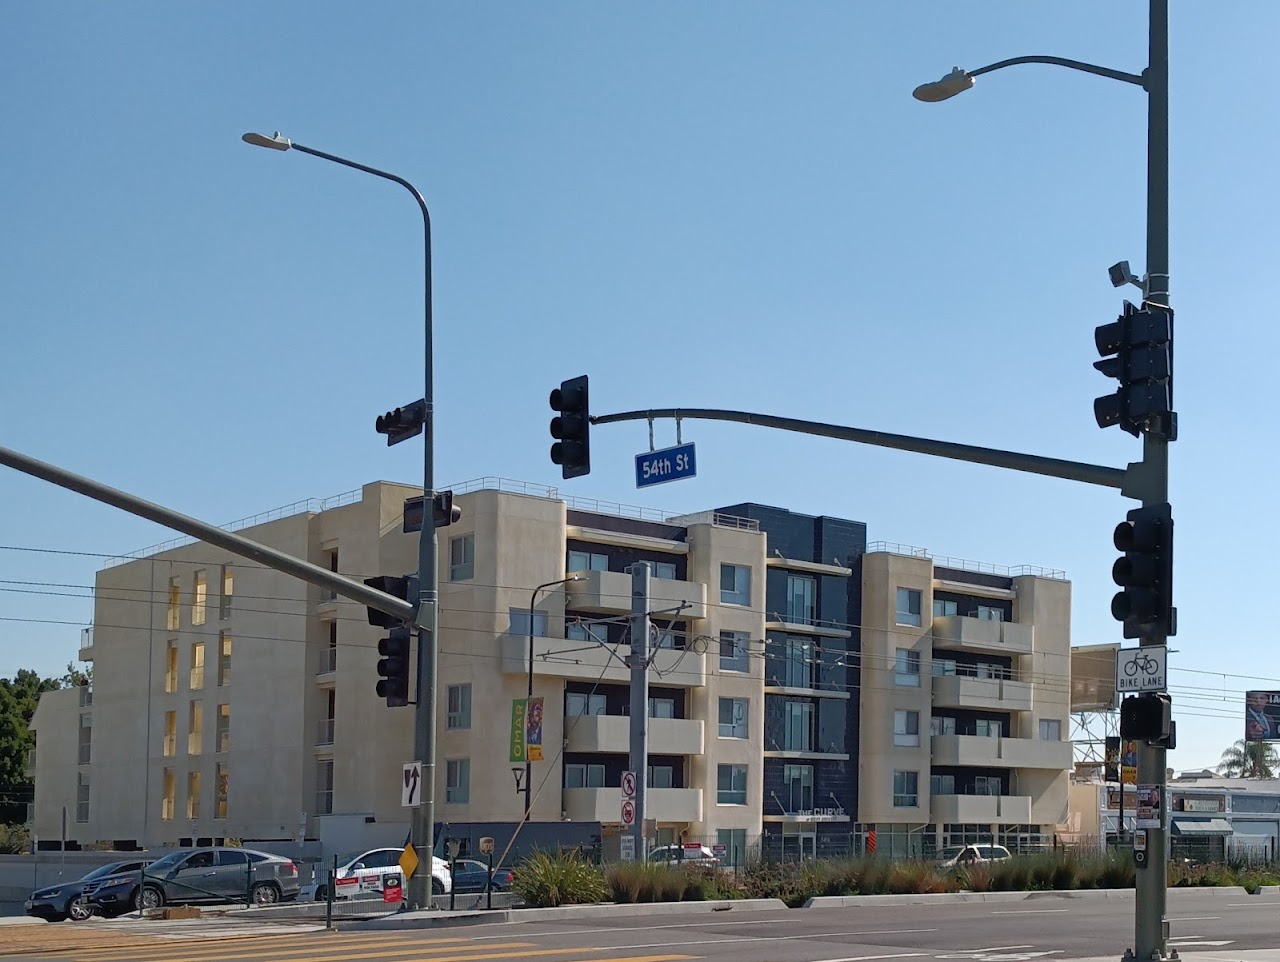 Photo of WEST ANGELES CITY PLACE SENIOR APARTMENTS at 5414 CRENSHAW BOULEVARD LOS ANGELES, CA 90043